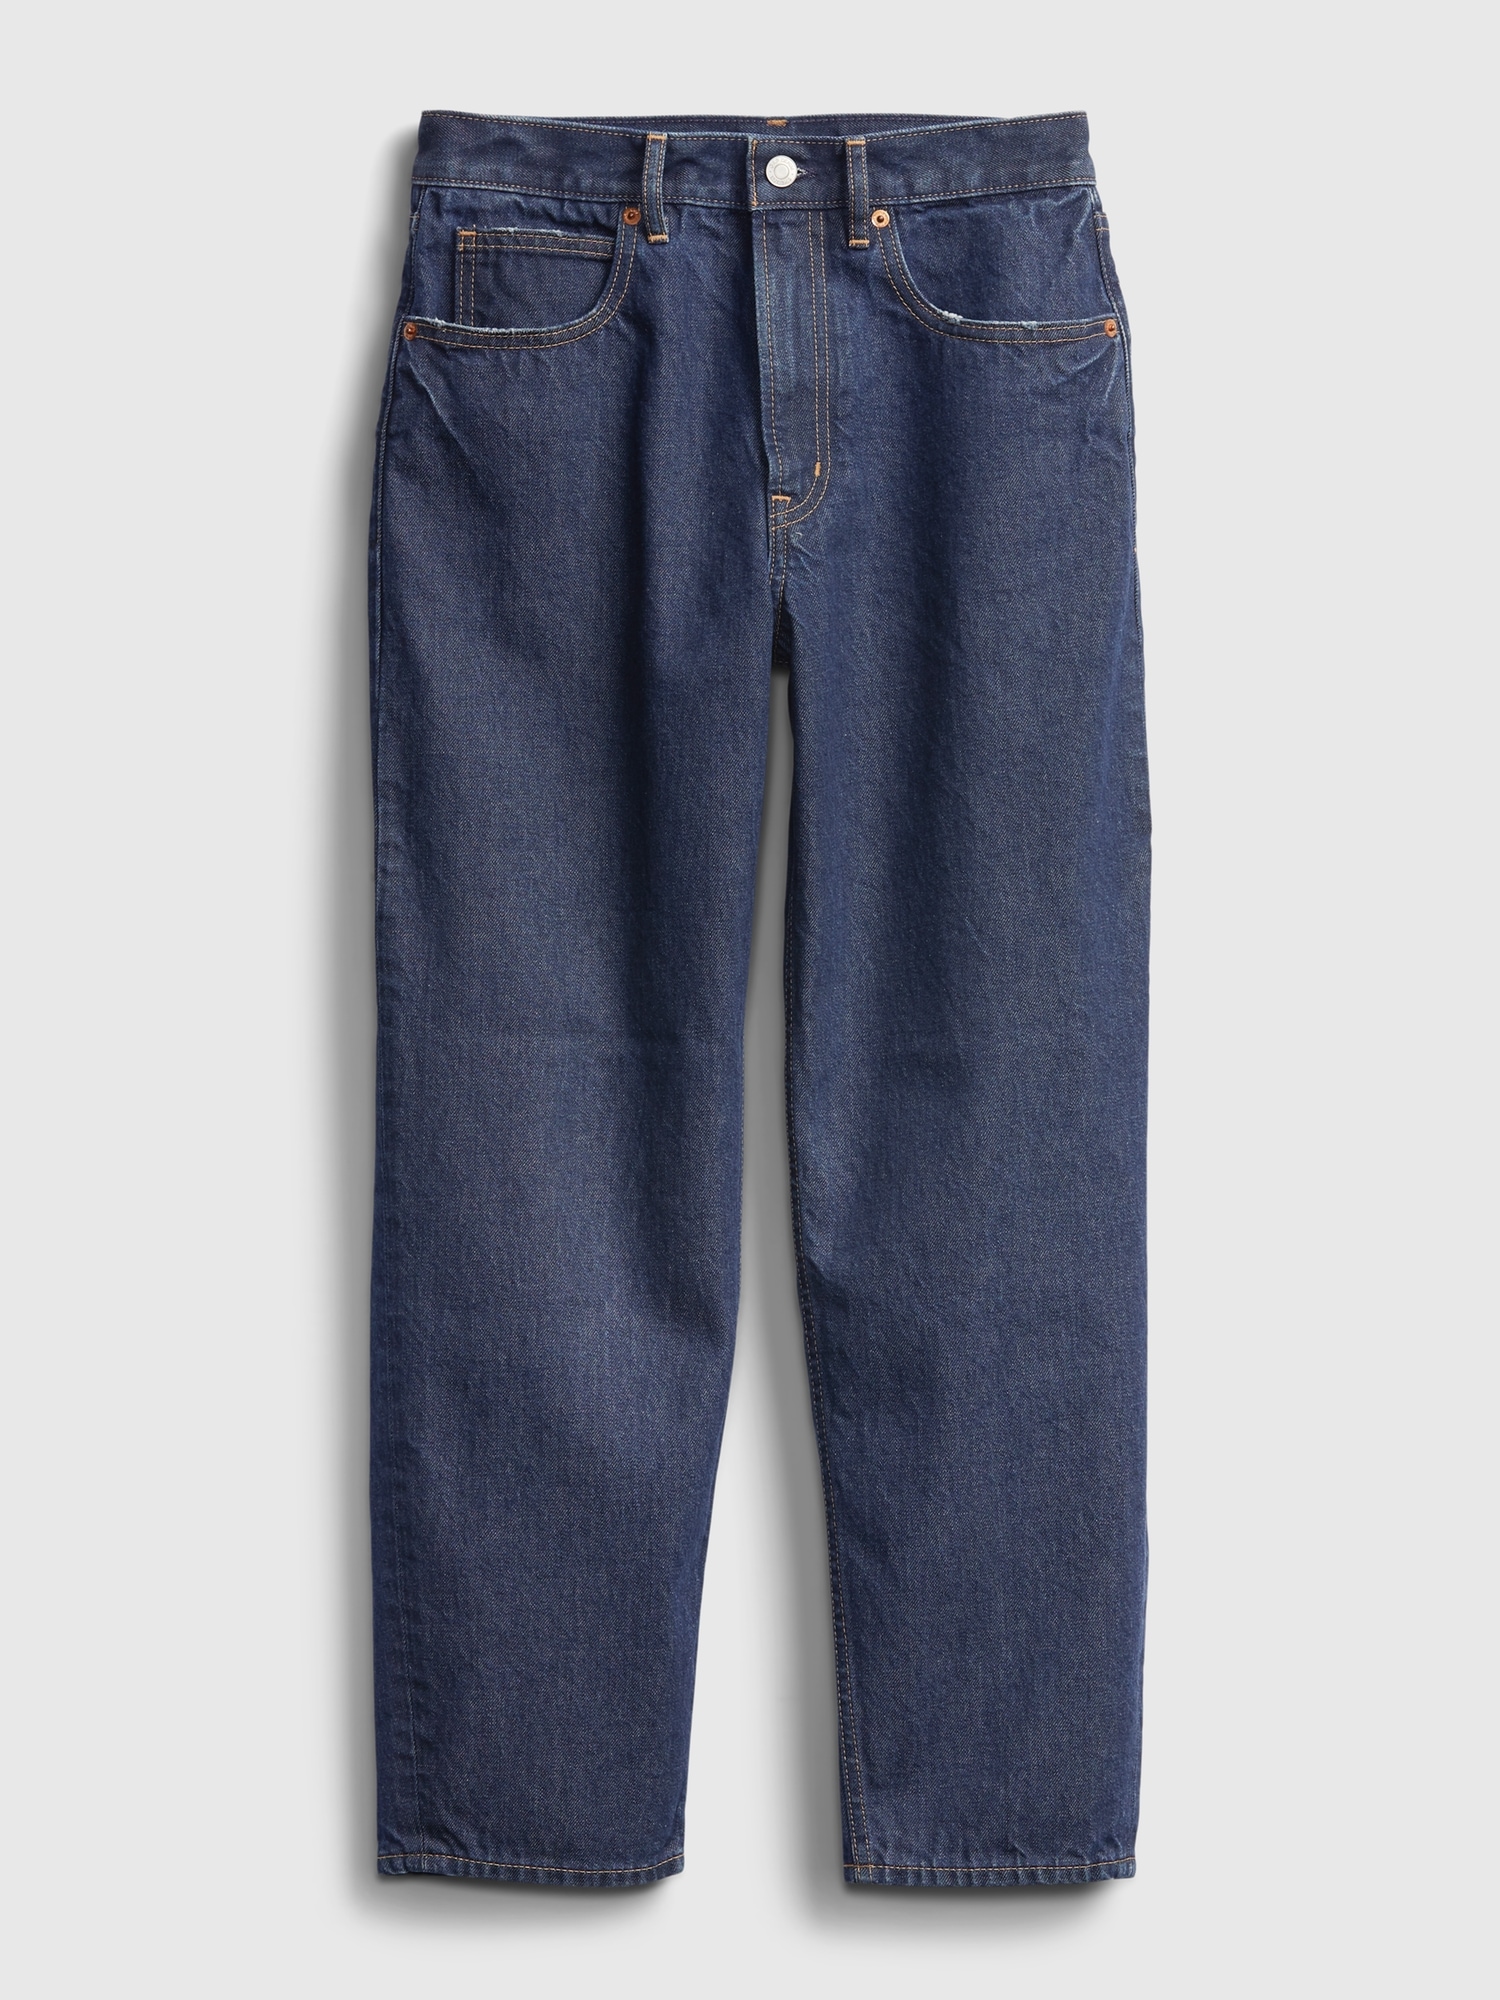 High Rise Barrel Jeans With Washwell™ | Gap